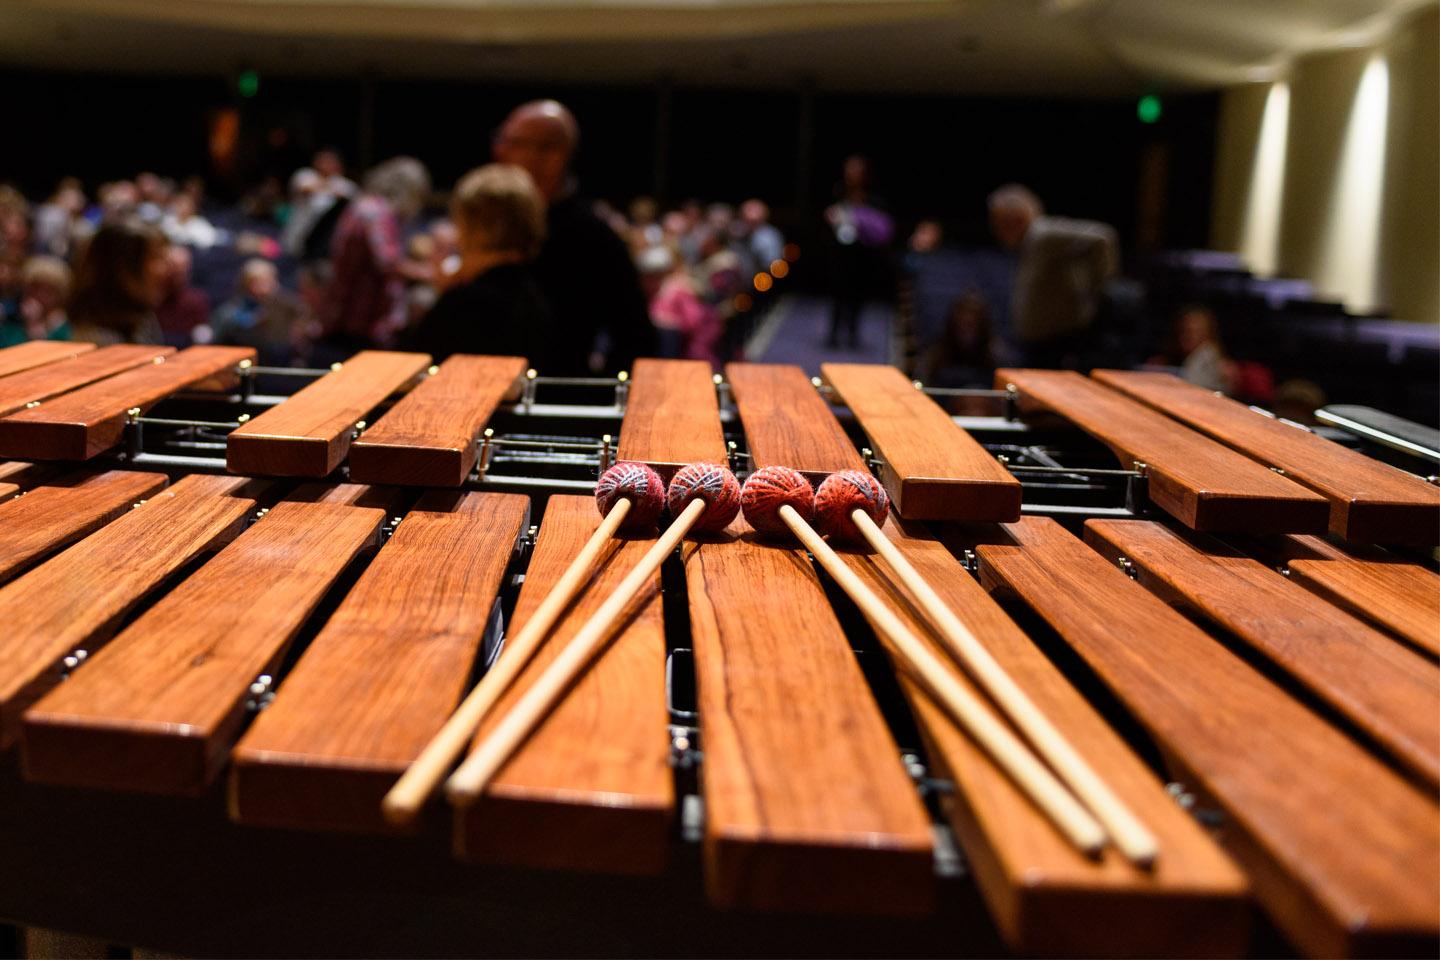 Marimba mallets resting on a marimba in a large concert hall